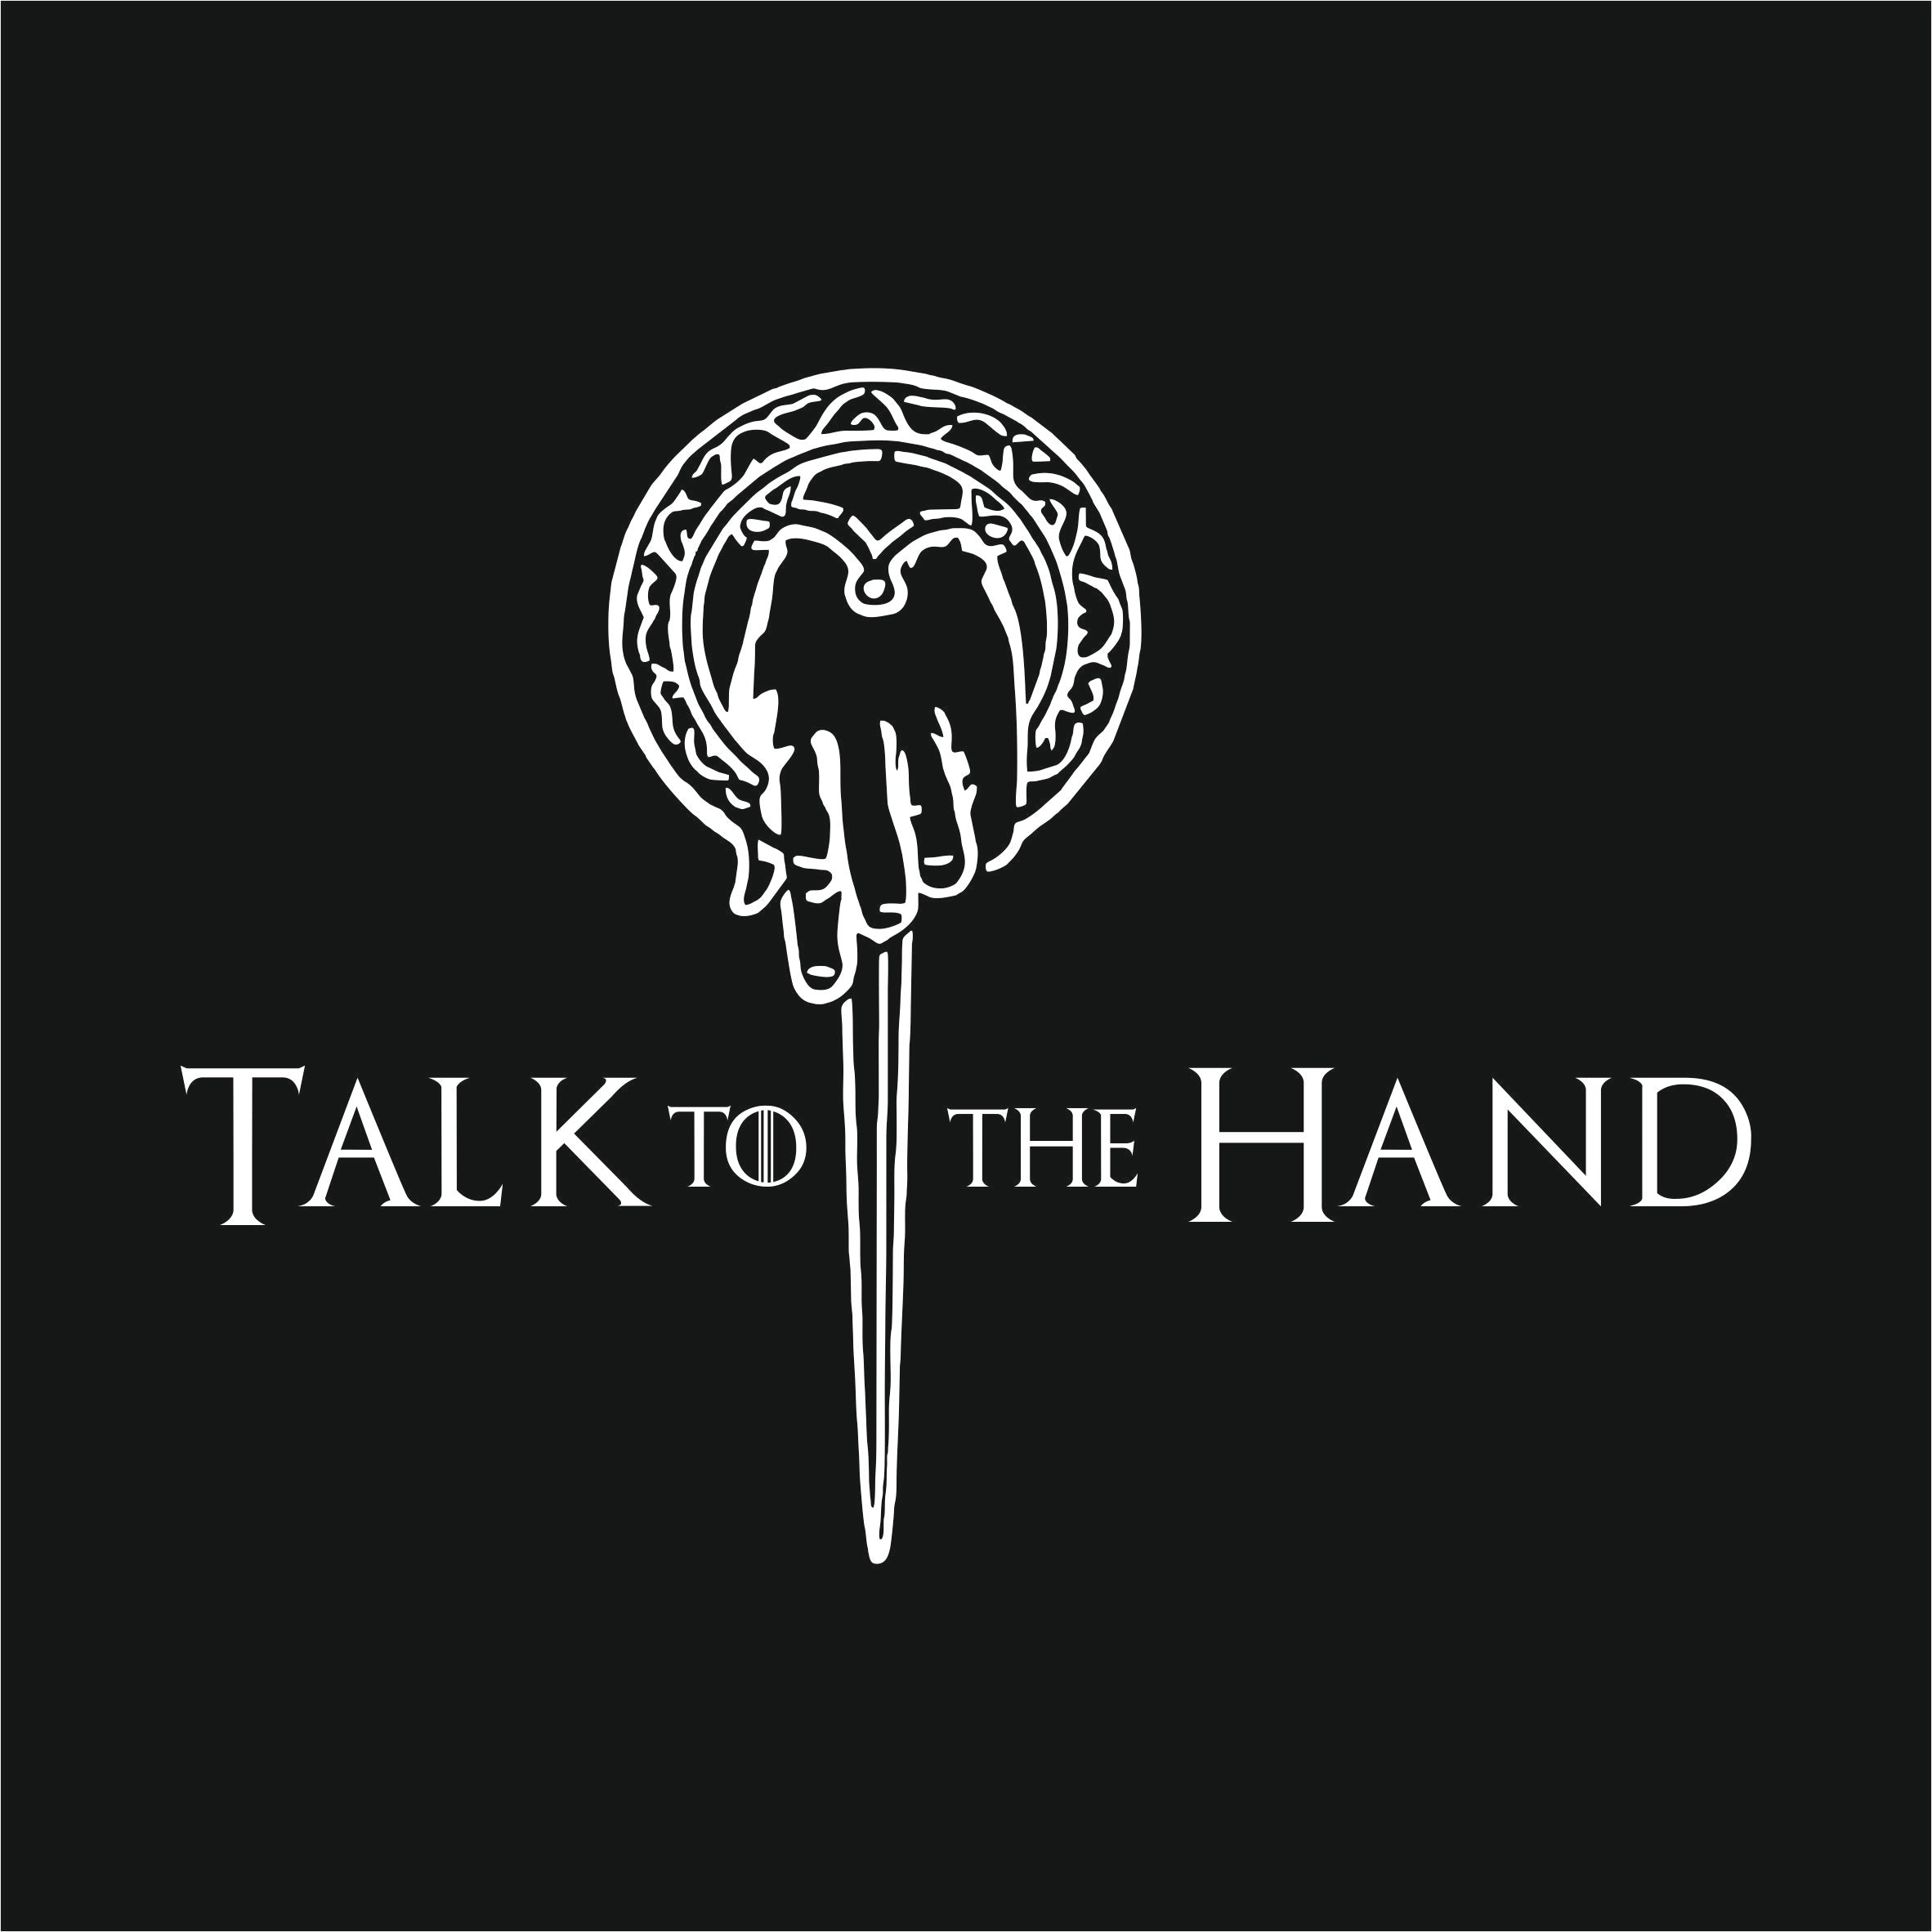 Talk To The Hand GOT Reactr Tshirts For Men - Eyewearlabs